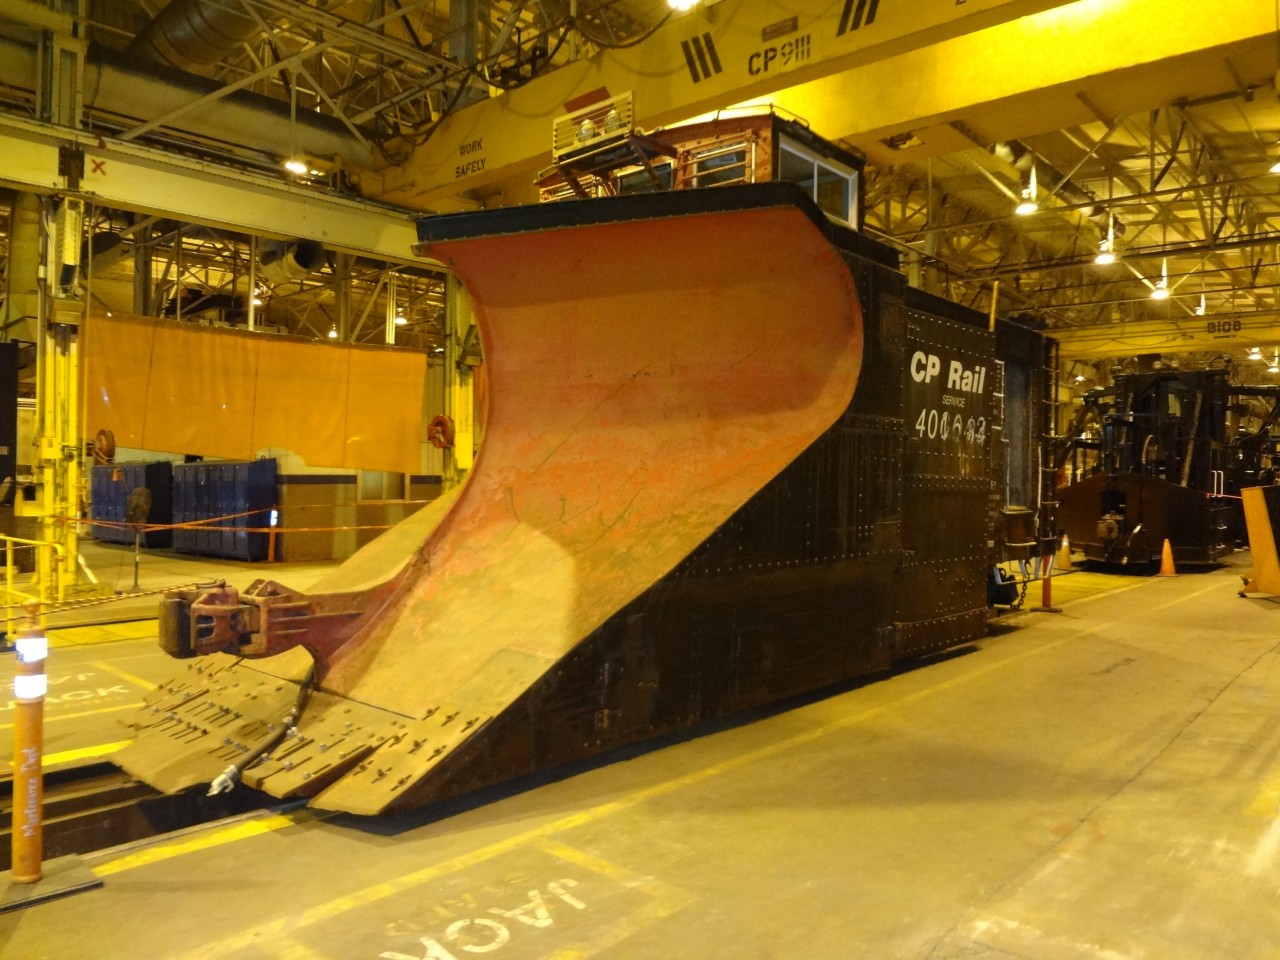 October 20, 2015 finds snow plow CP 401034 inside Weston shops in Winnipeg, MB waiting assessment to determine its future at CP. On the same track behind the plow was Jordan spreader CP 402877 which had just been upgraded to hydraulic controls from the original air controlled plow and wings. On the same track in from of the plow over an inspection pit was CP 414225, an American 825 DE locomotive crane receiving a detailed inspection and servicing. A great day at the shop if you're interests lean towards Work Equipment. :-)